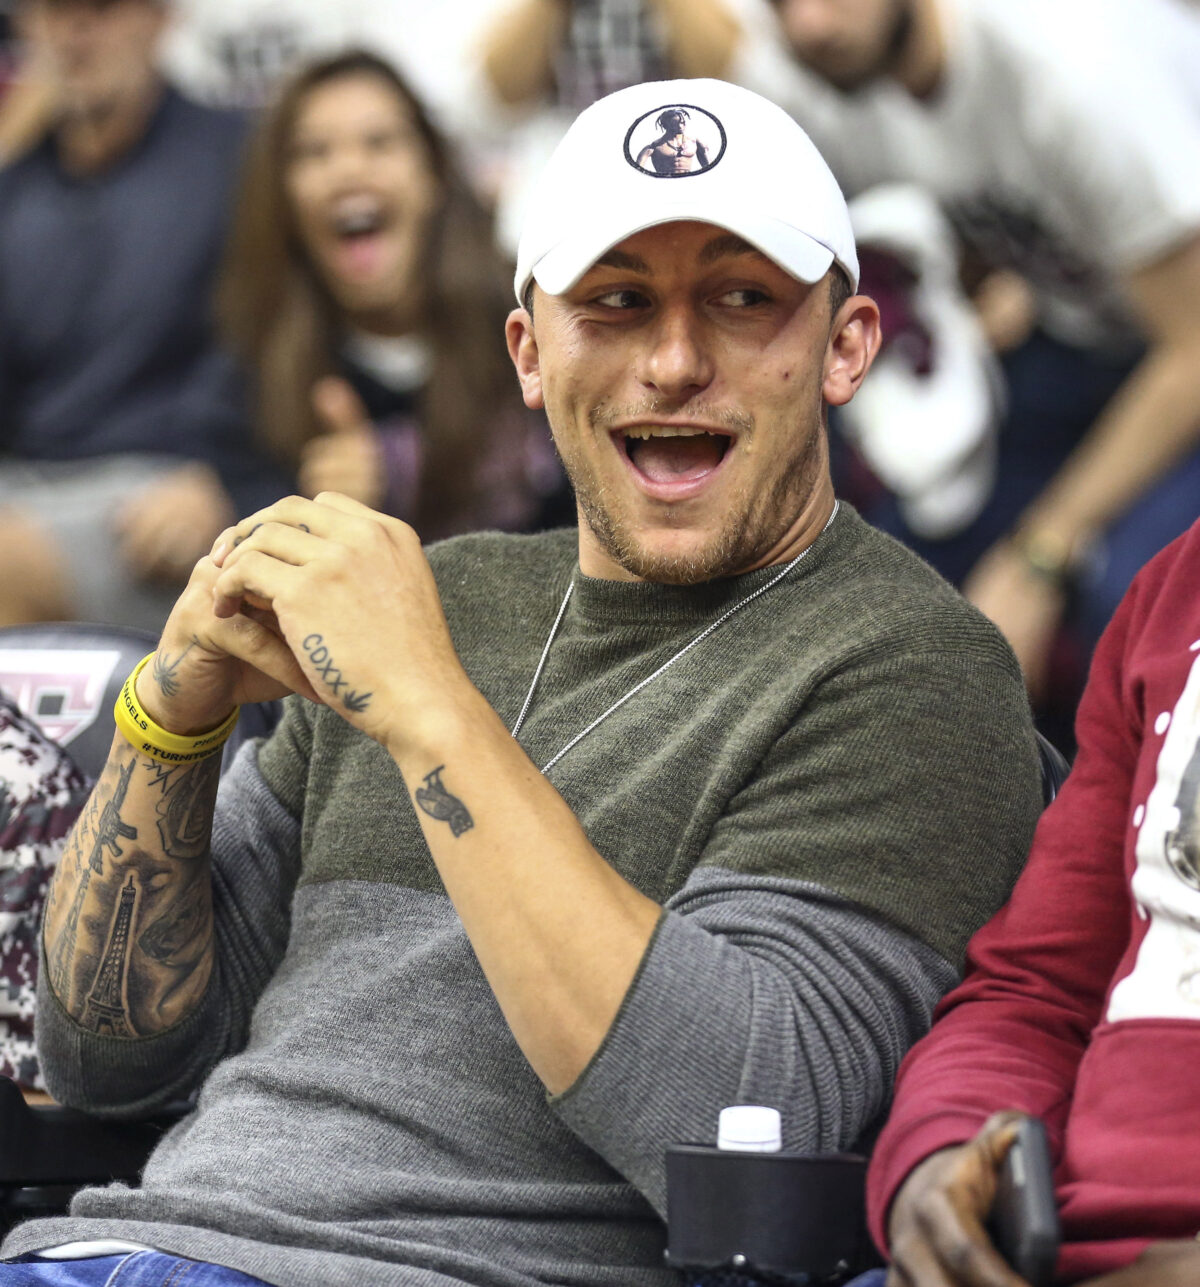 Heisman winner Johnny Manziel to open bar in College Station in the fall